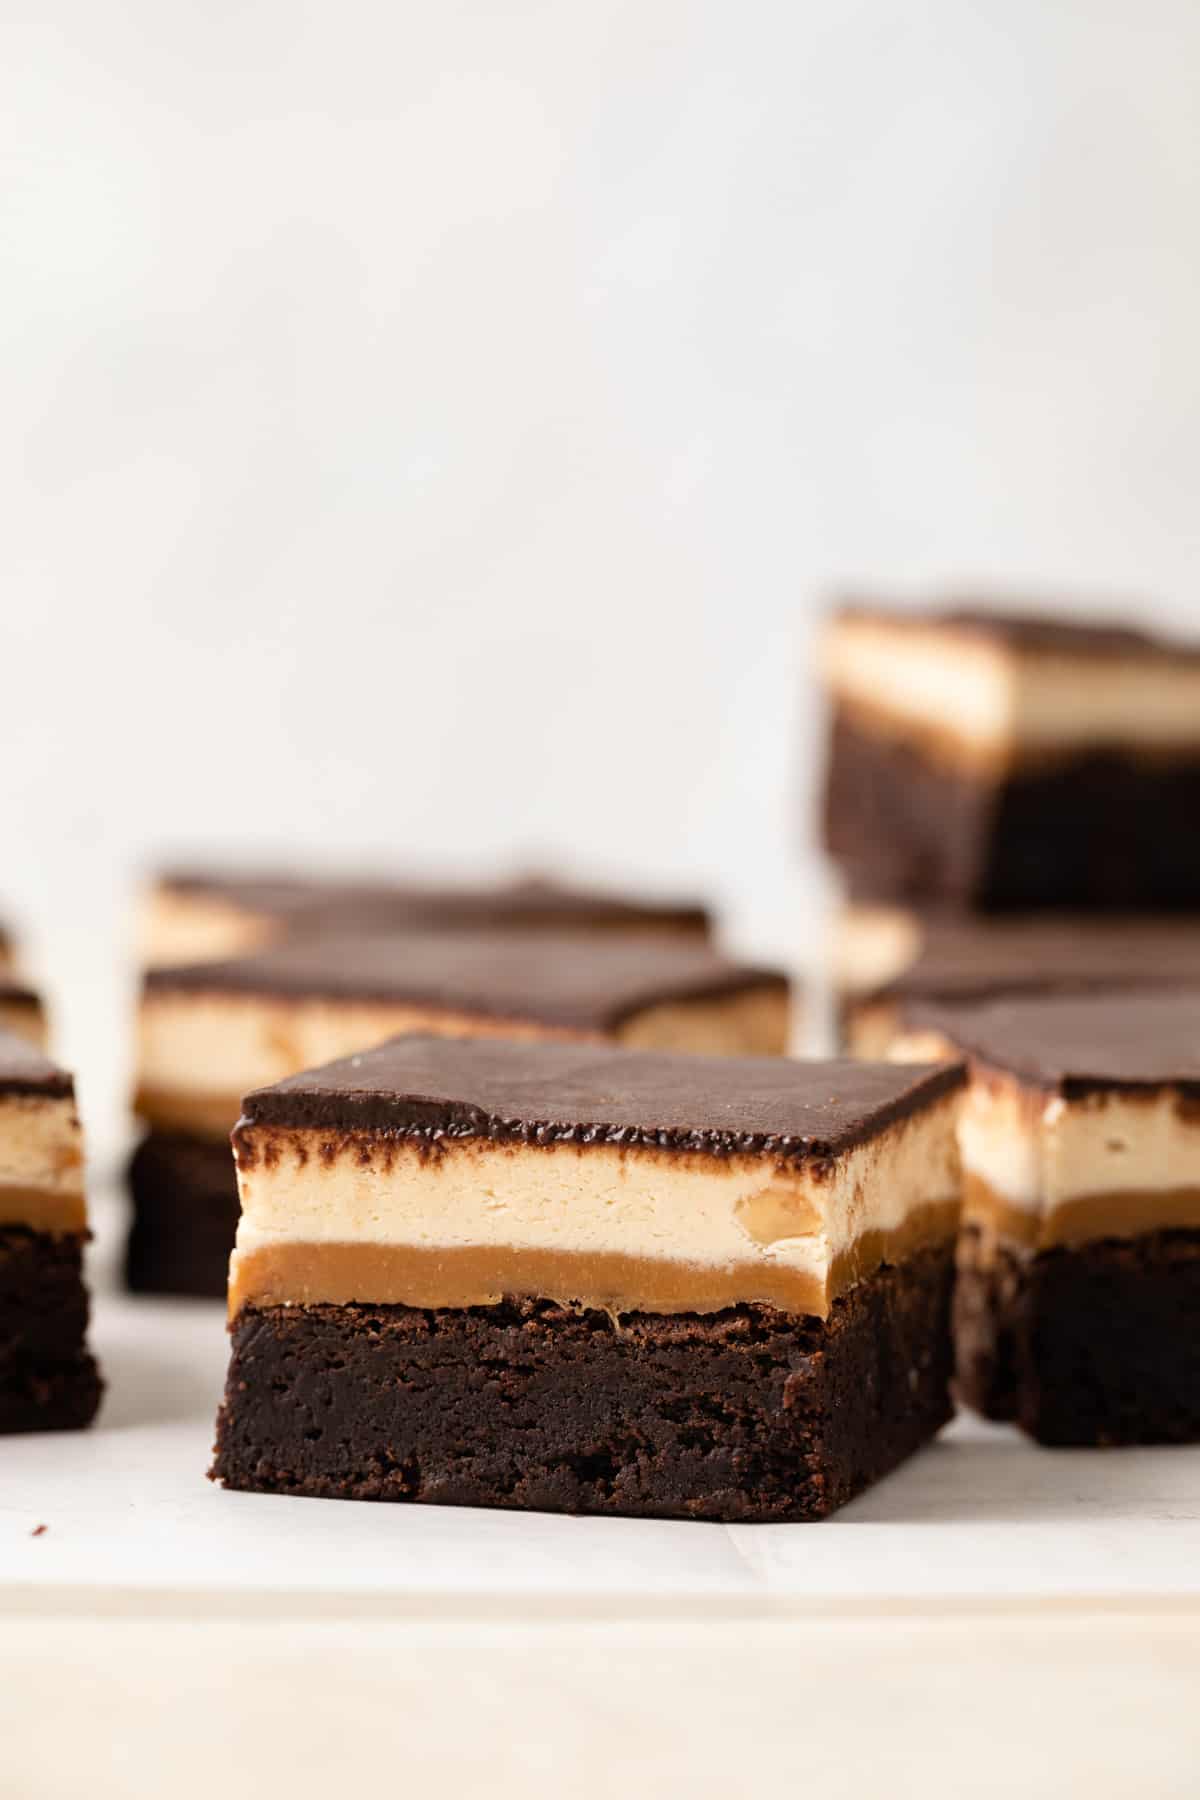 A close up view of a fudgy chocolate brownie with layers of gooey caramel, chewy nougat, and chocolate ganache over the top.